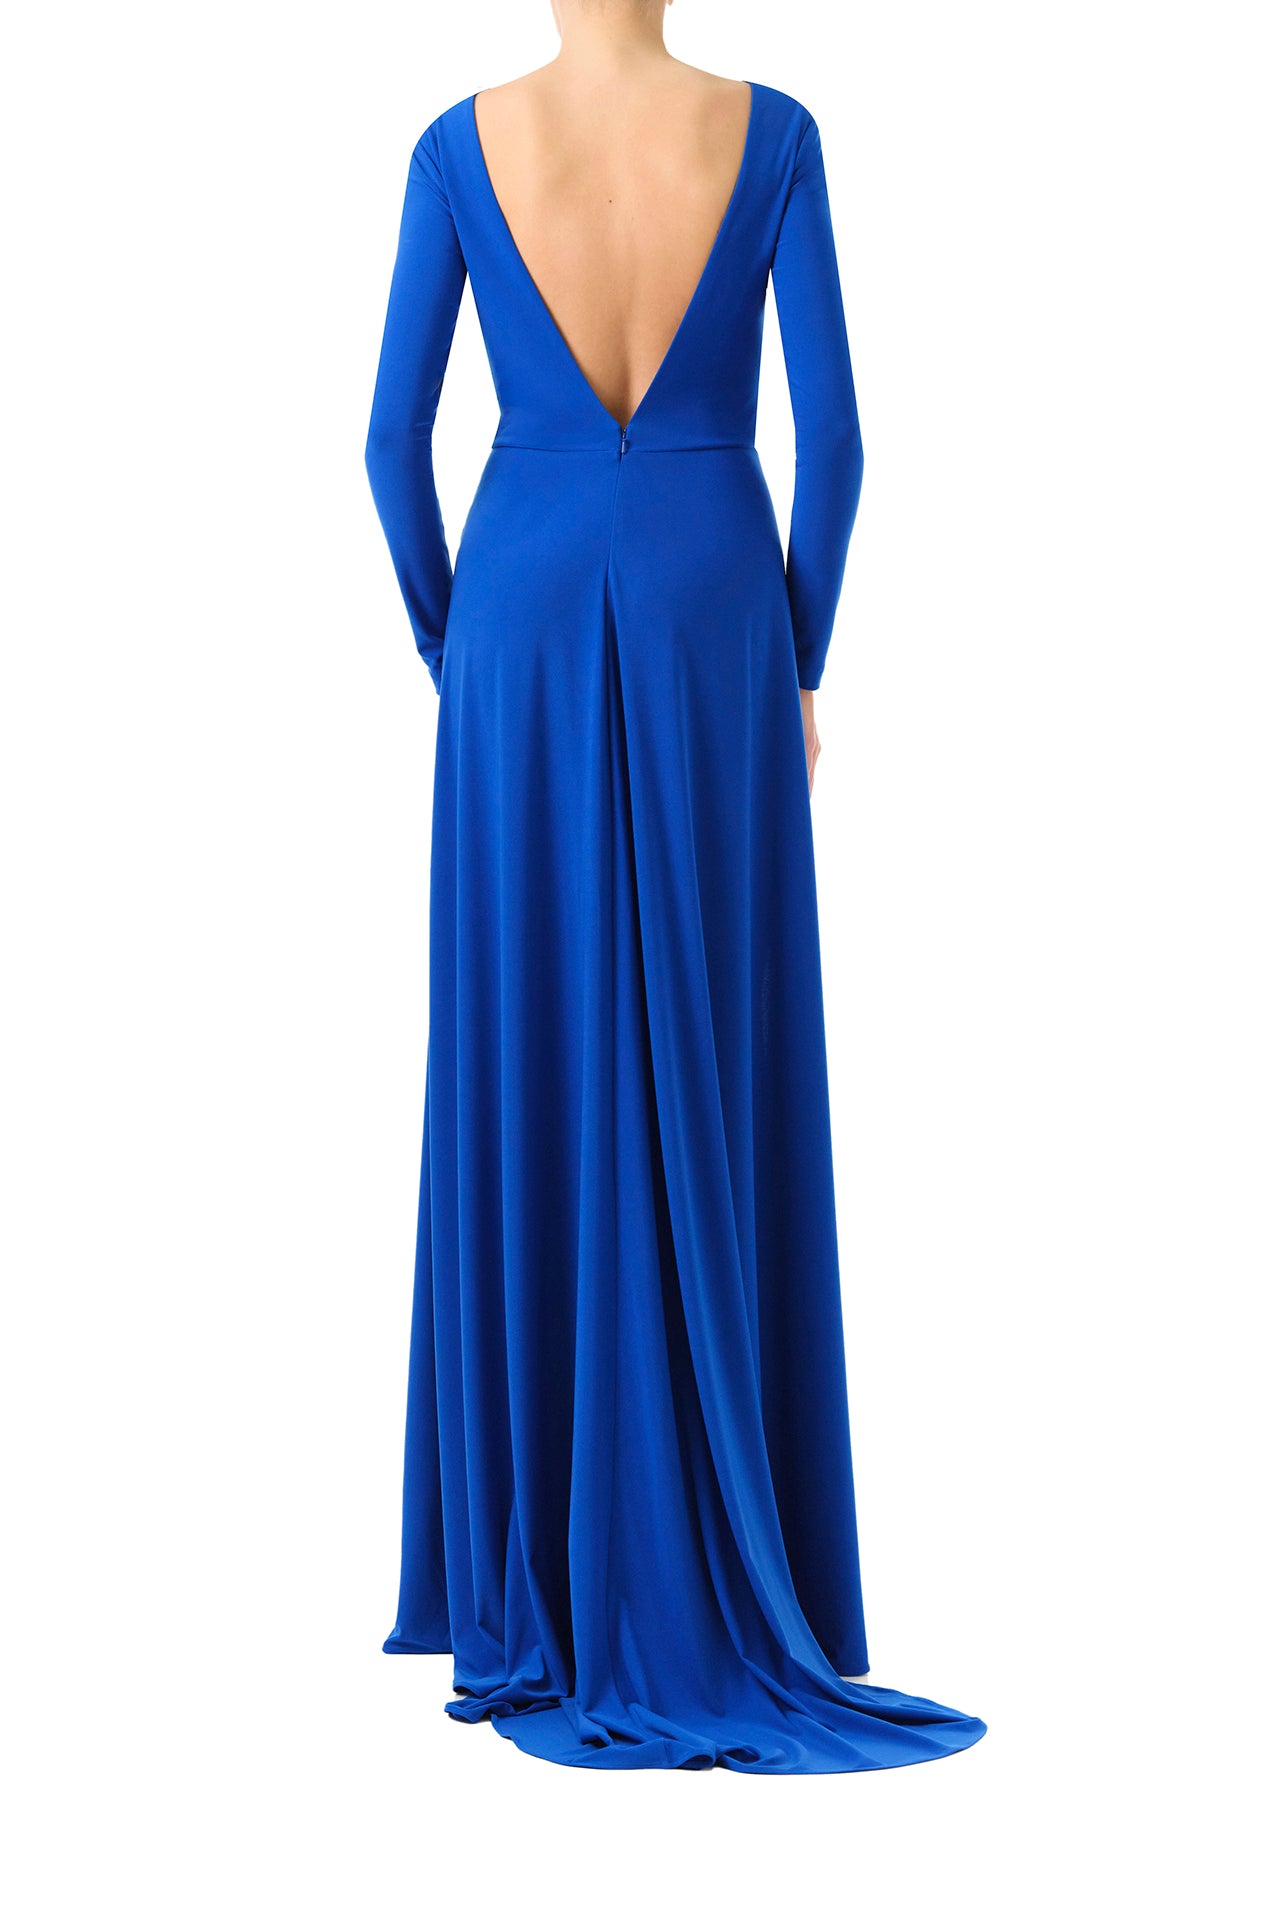 Monique Lhuillier Fall 2024 long sleeve, cobalt jersey gown with knotted keyhole neckline, low v-back and high skirt slit - back.